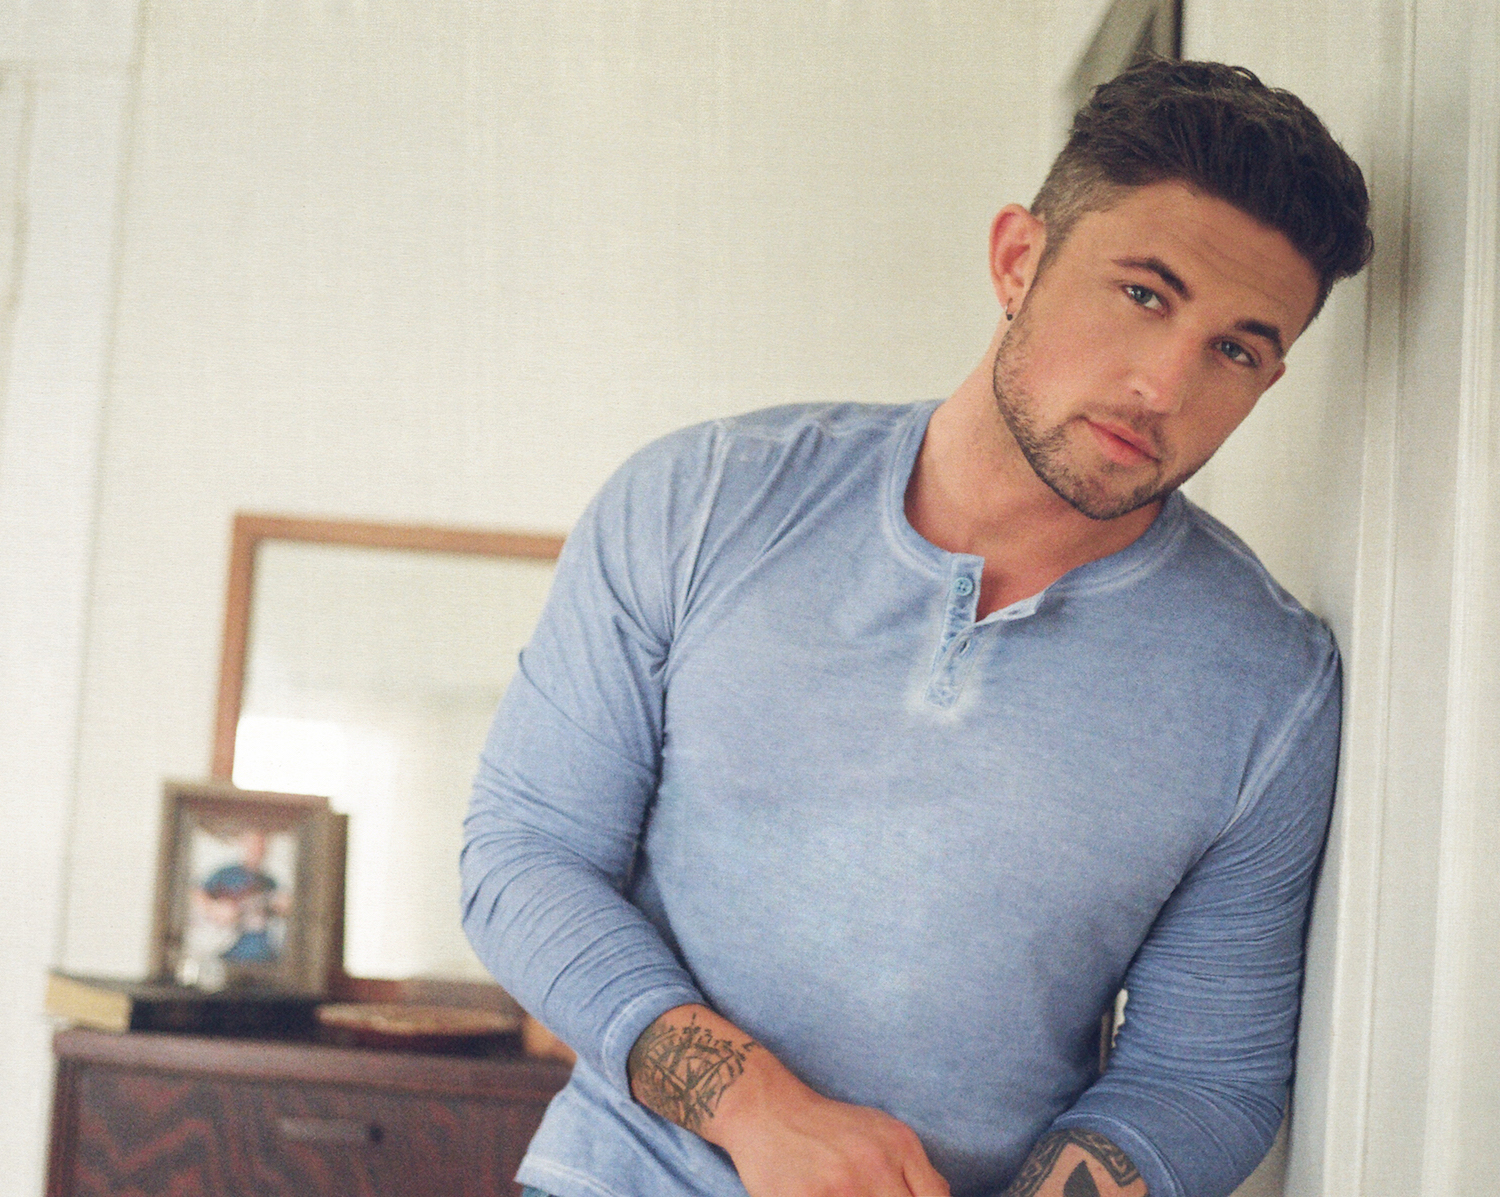 WATCH: Michael Ray Unveils Poignant Music Video for “Get To You”